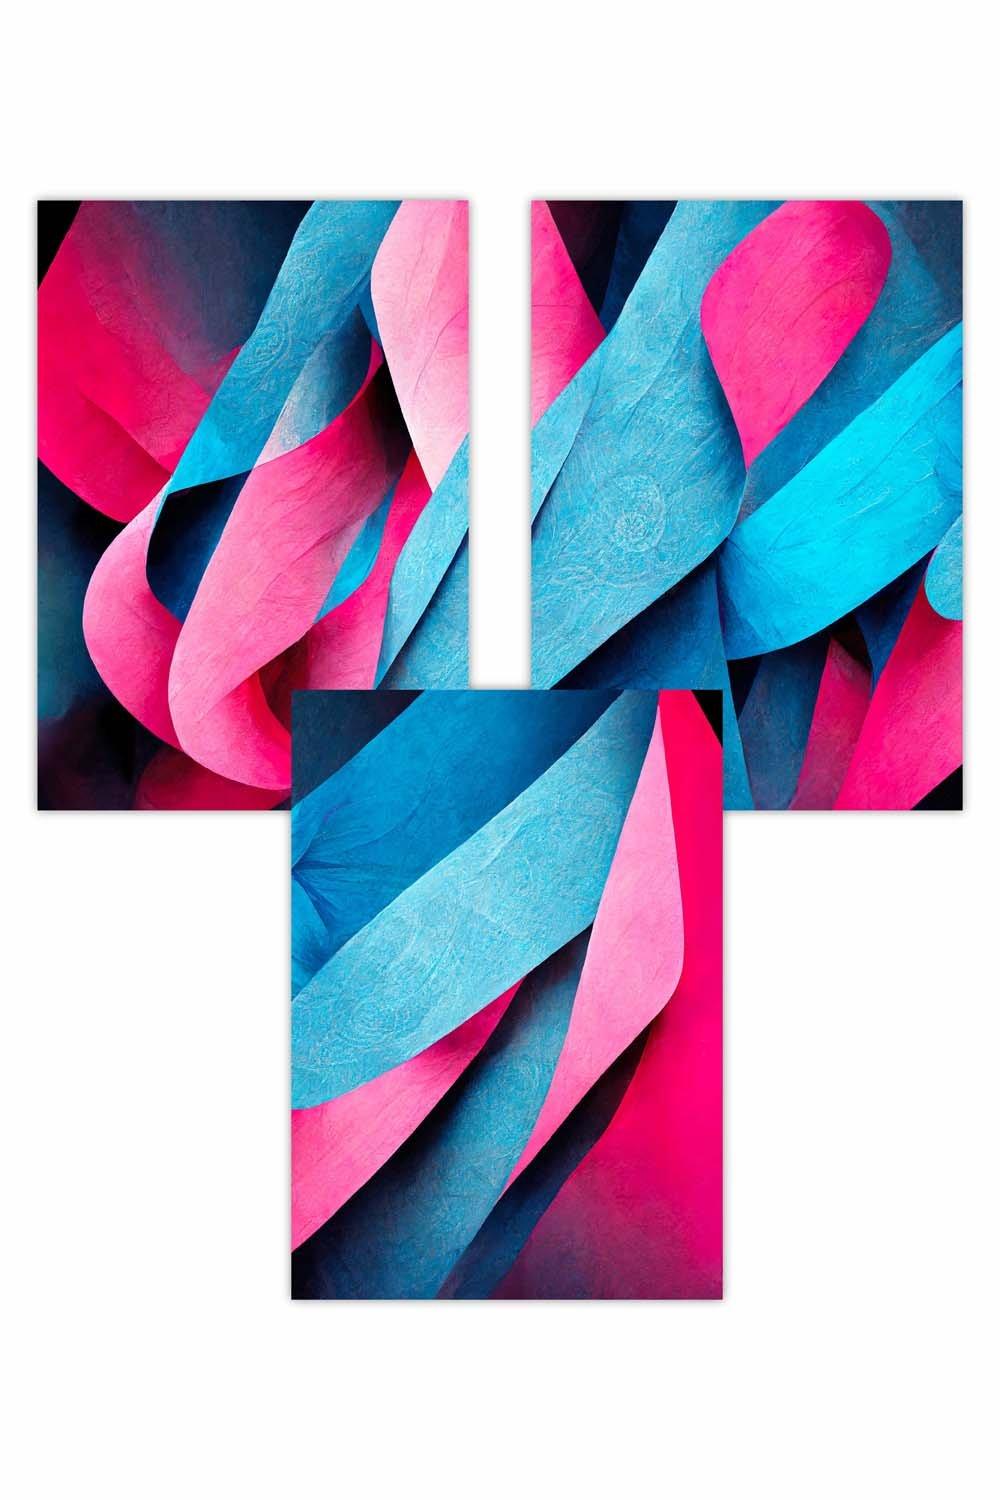 Set of 3 Geometric Abstract Bright Blue and Hot Pink Deco Shapes Art Posters